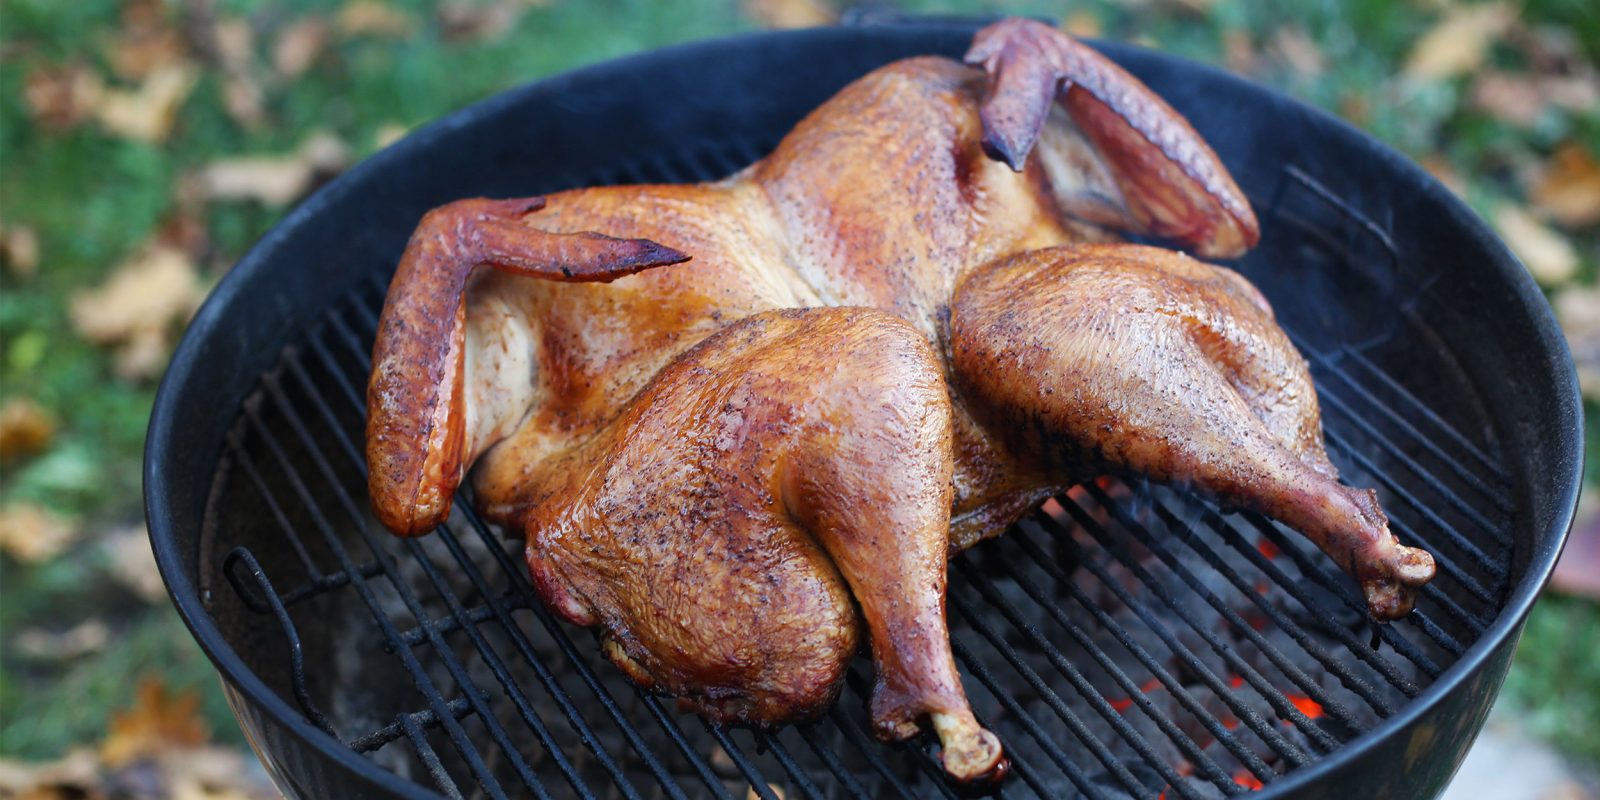 The Greatest Grilled Turkey Recipe